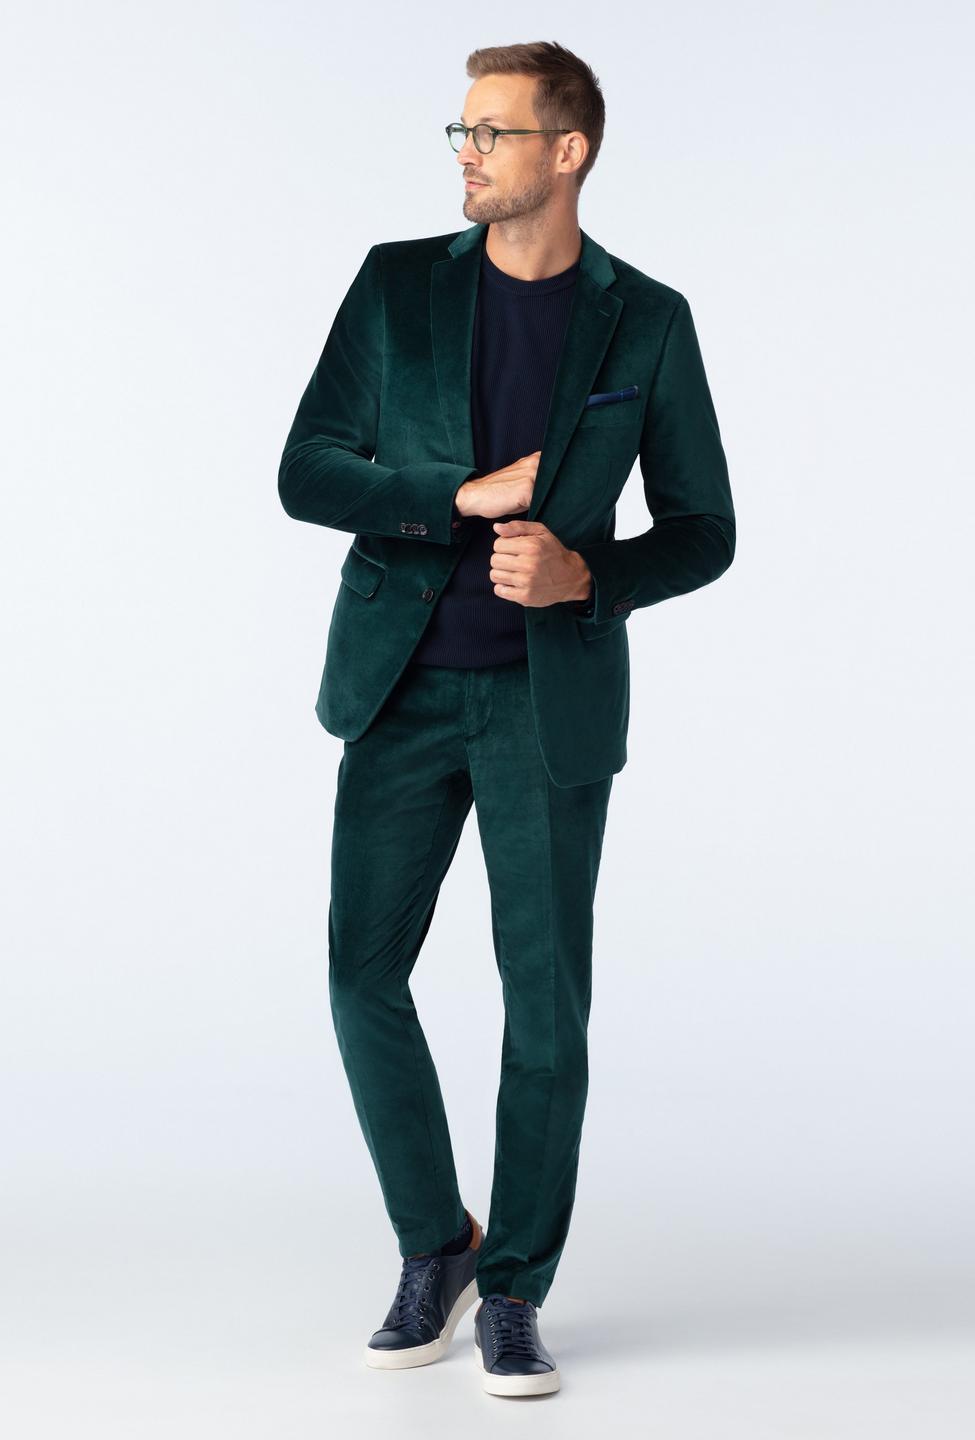 Green suit - Harford Solid Design from Premium Indochino Collection